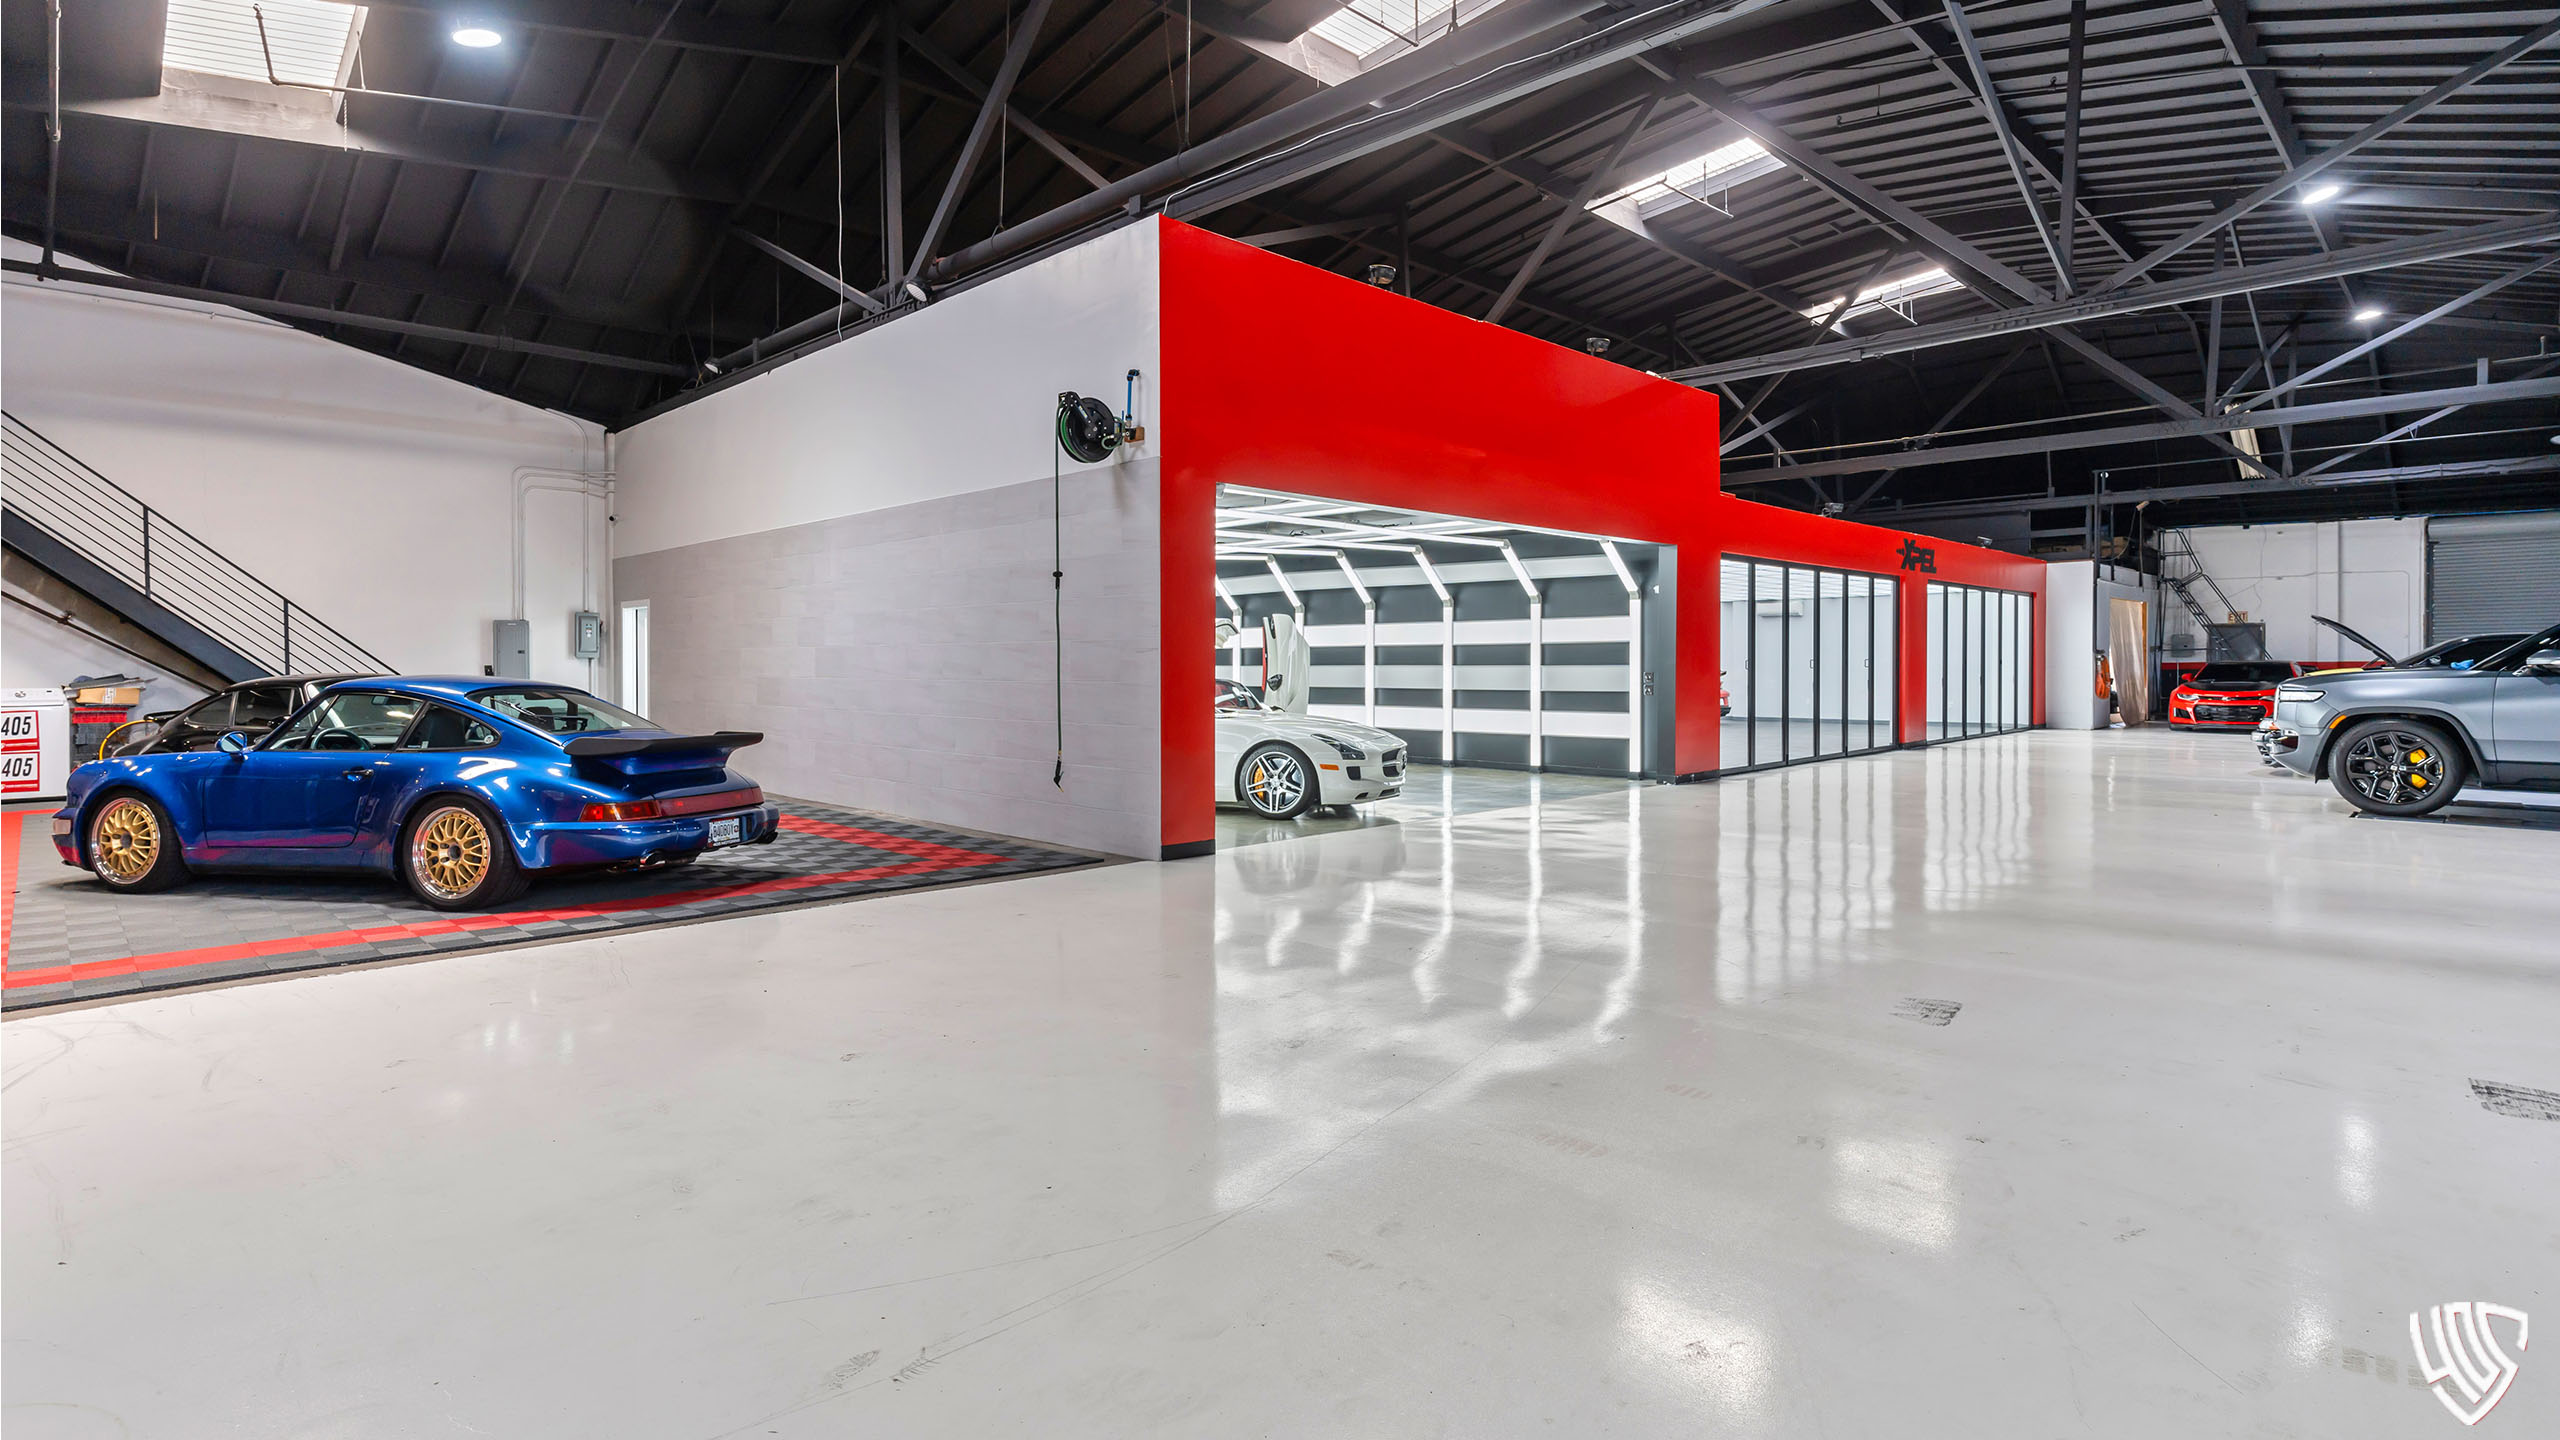 405 Motoring State of the Art Facilities in Inglewood, California.